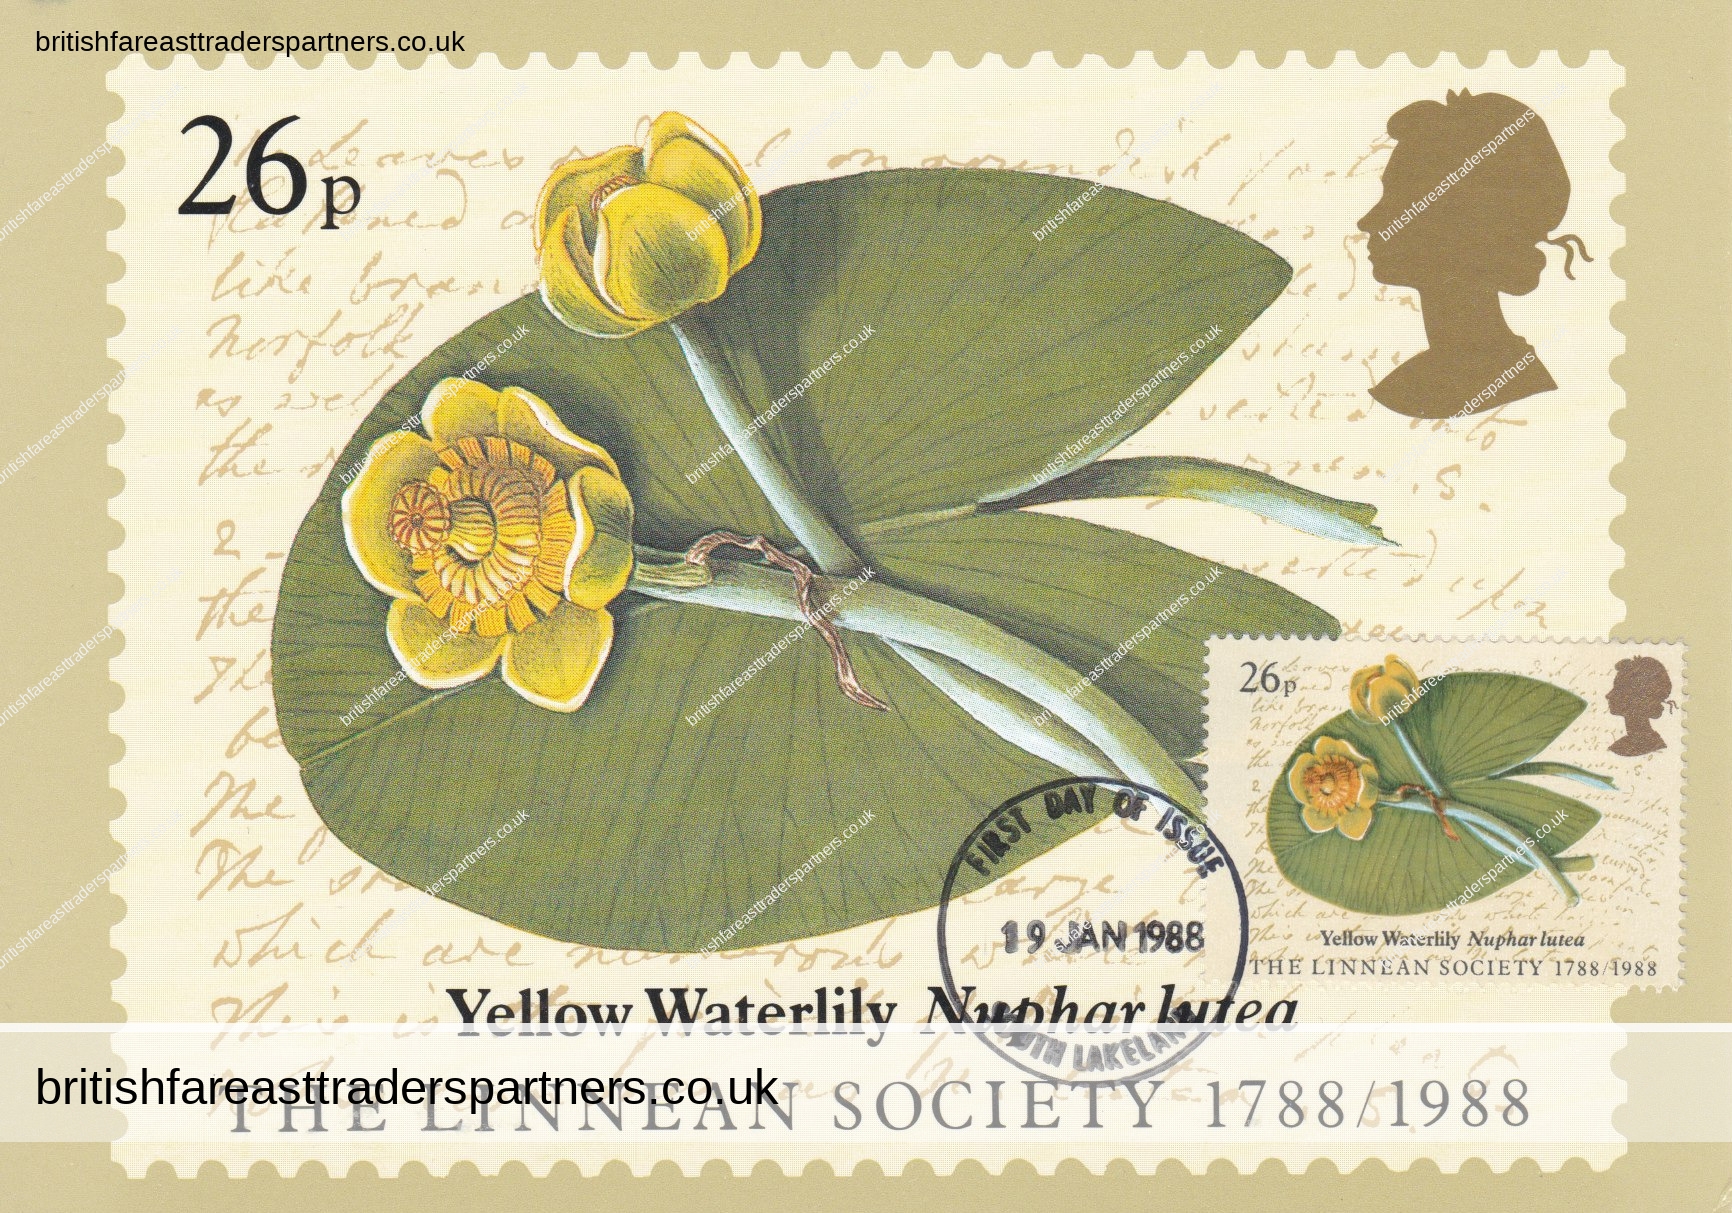 VINTAGE 198826p THE LINNEAN SOCIETY 1788-1988 (YELLOW WATERLILY) POST OFFICE PICTURE CARD SERIES POSTCARD